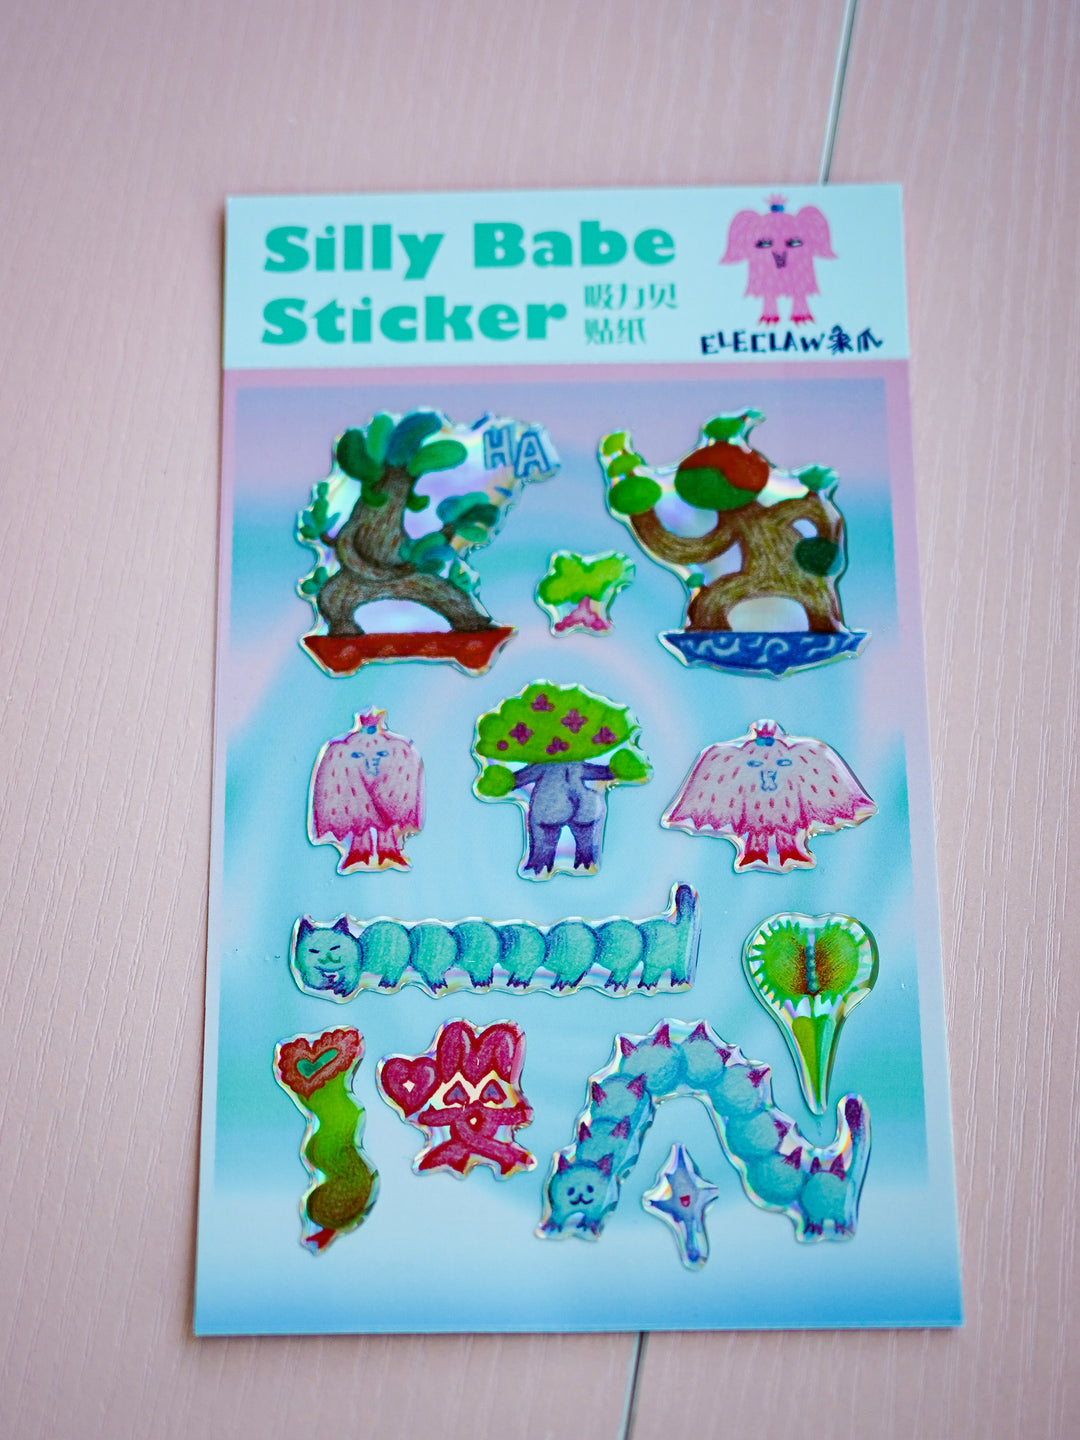 Silly Babe Sticker Deal Buy 3, Get 1 Free Sticker Offer, Sticker Bundle Promotion, Fun Sticker Freebie Deal, Exclusive Sticker Offer, Limited Time Sticker Promotion, Silly Babe Sticker Special Deal, Sticker Combo Discount, Free Sticker with Purchase, Bundle and Save on Stickers,